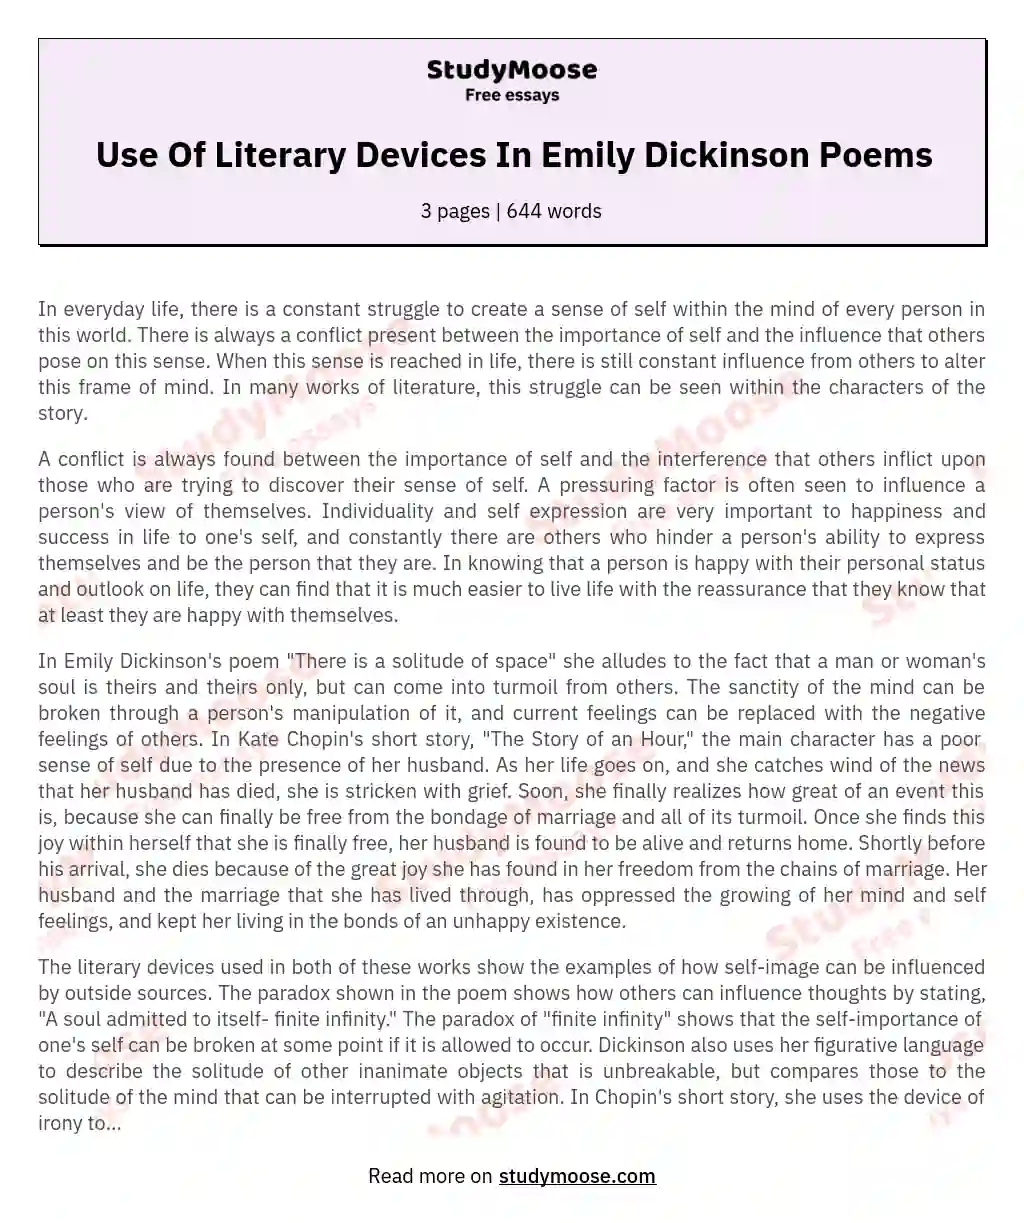 Use Of Literary Devices In Emily Dickinson Poems